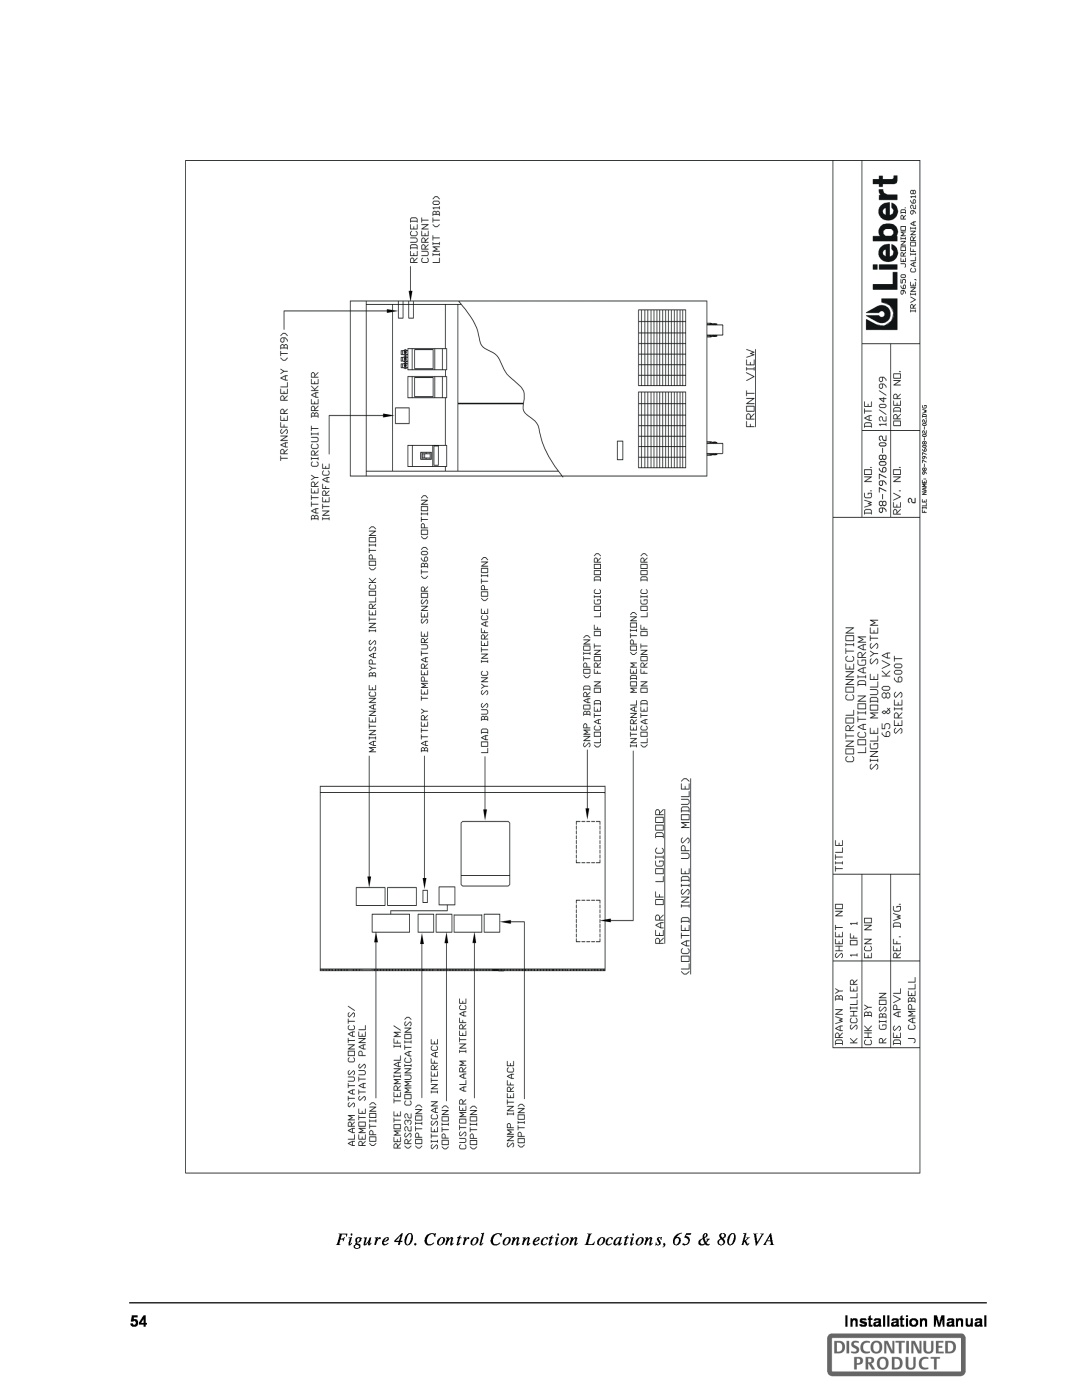 Emerson SERIES 600T manual Control Connection Locations, 65 & 80 kVA, Discontinued Product 